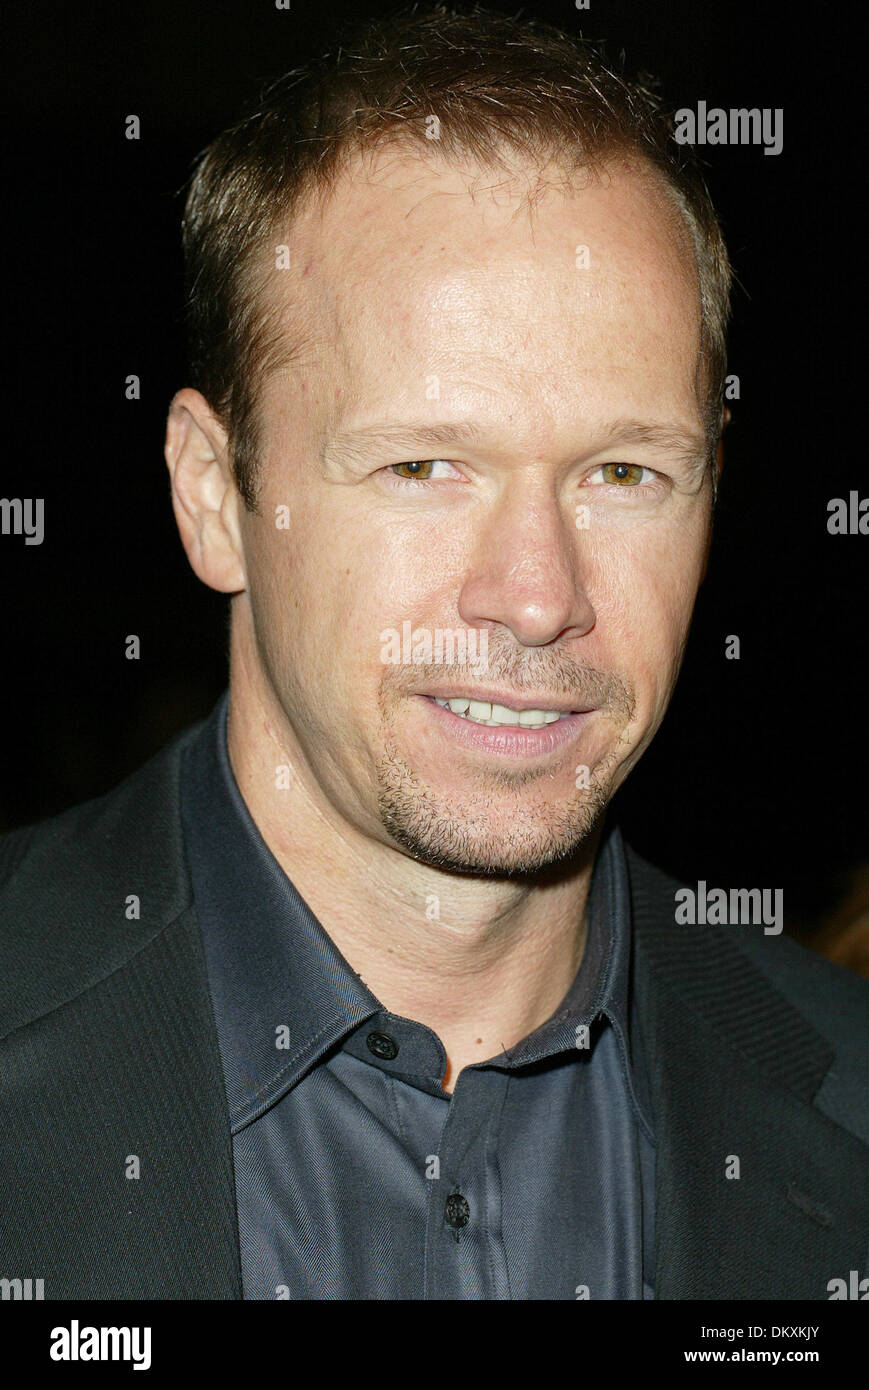 DONNIE WAHLBERG.ACTOR & SINGER,BROTHER OF MARK BEVERLY HILLS, LOS ...